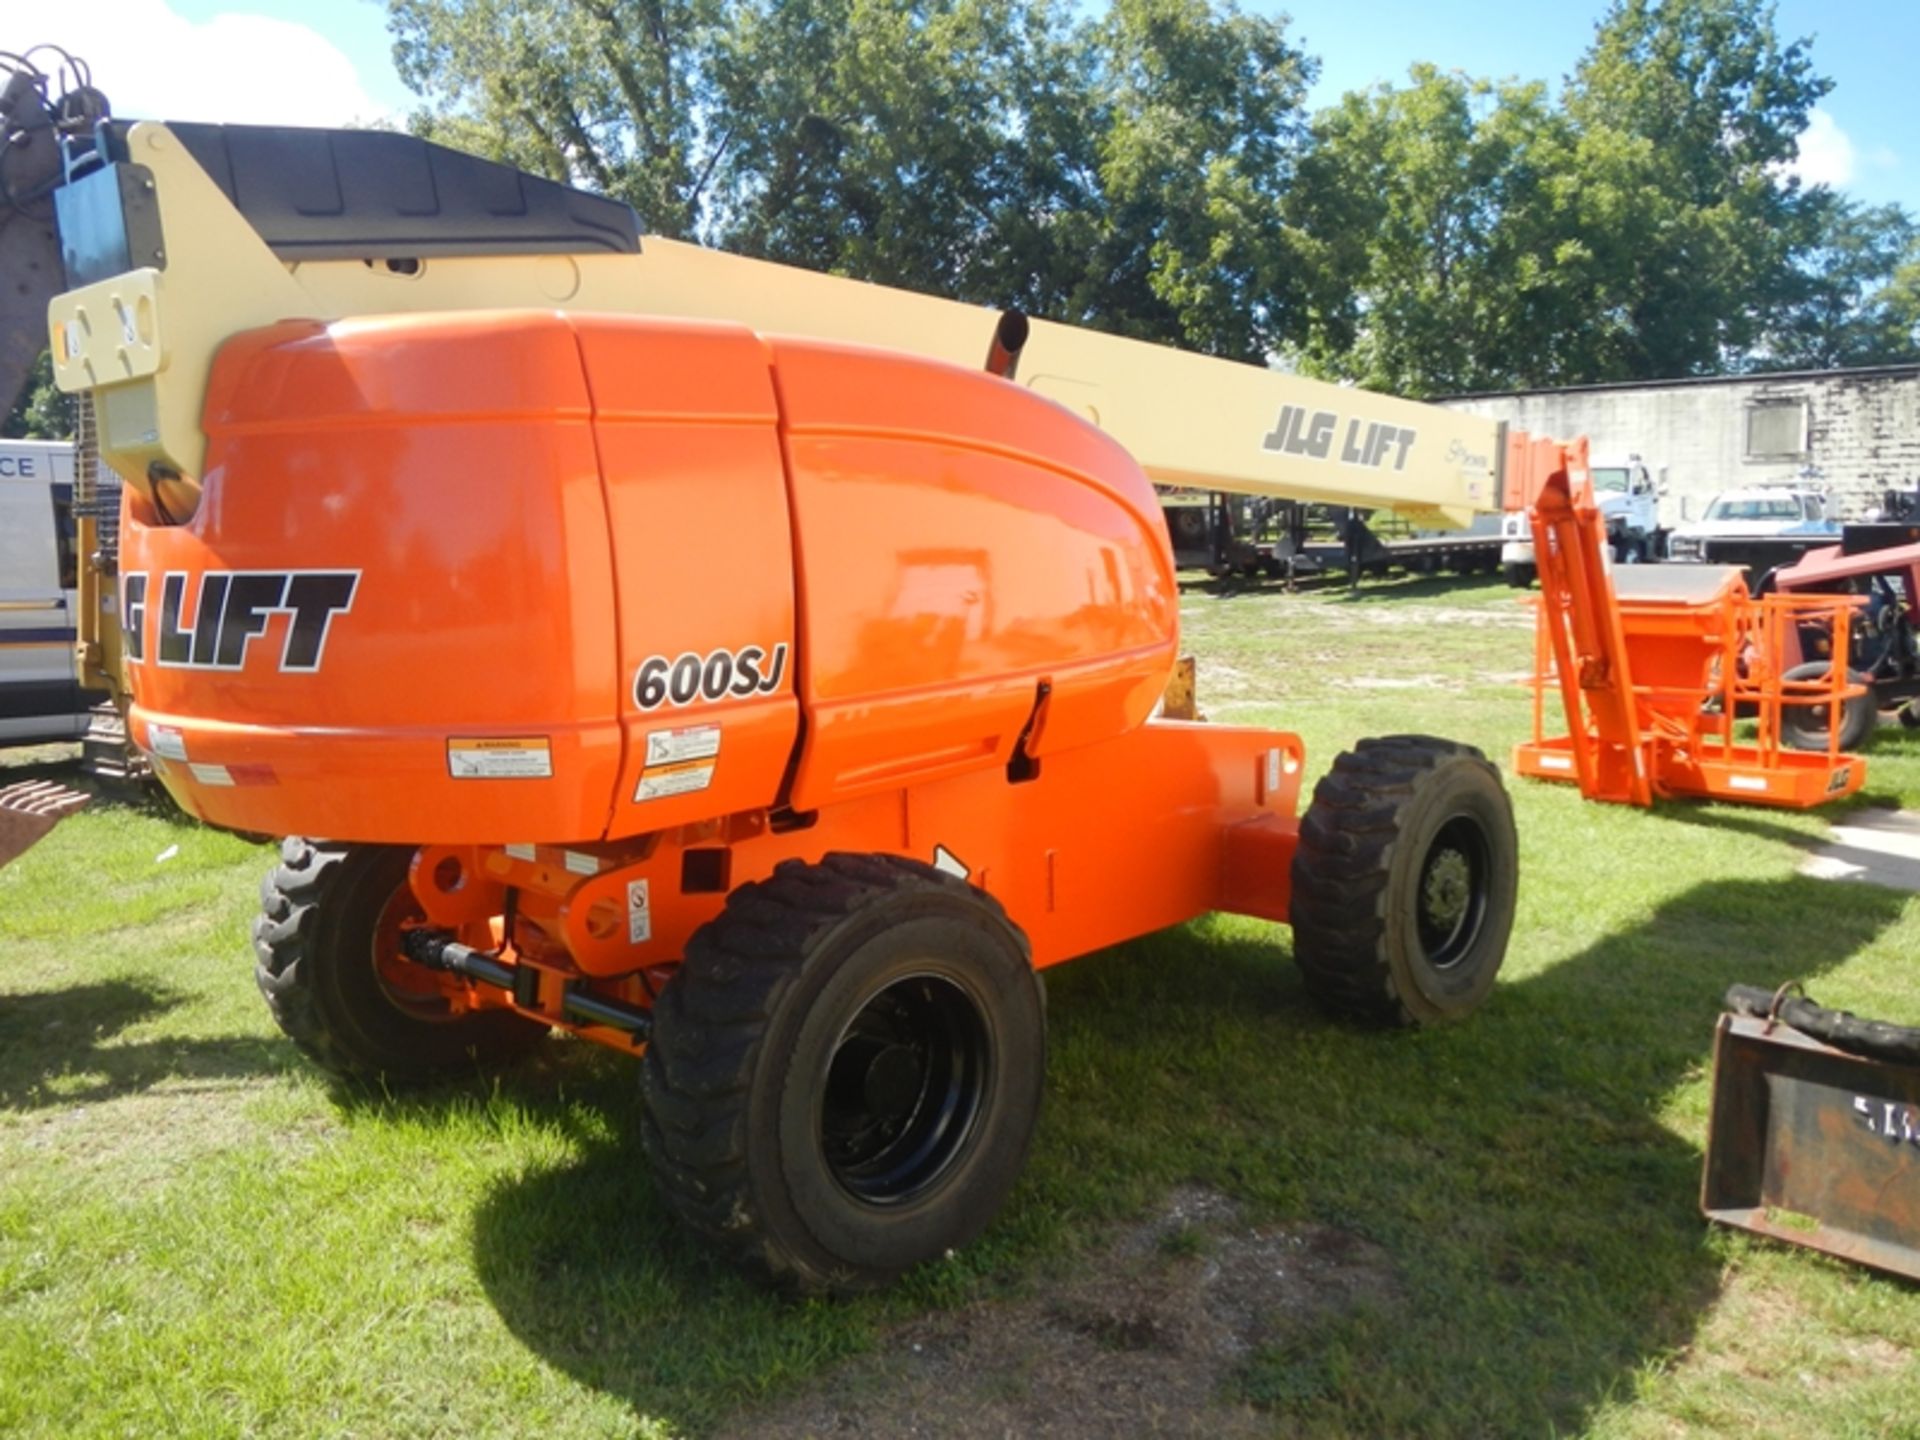 JLG 600SJ rough terrain 65' telescopic aerial lift new paint and new tires vin# 0300027119 - Image 3 of 6